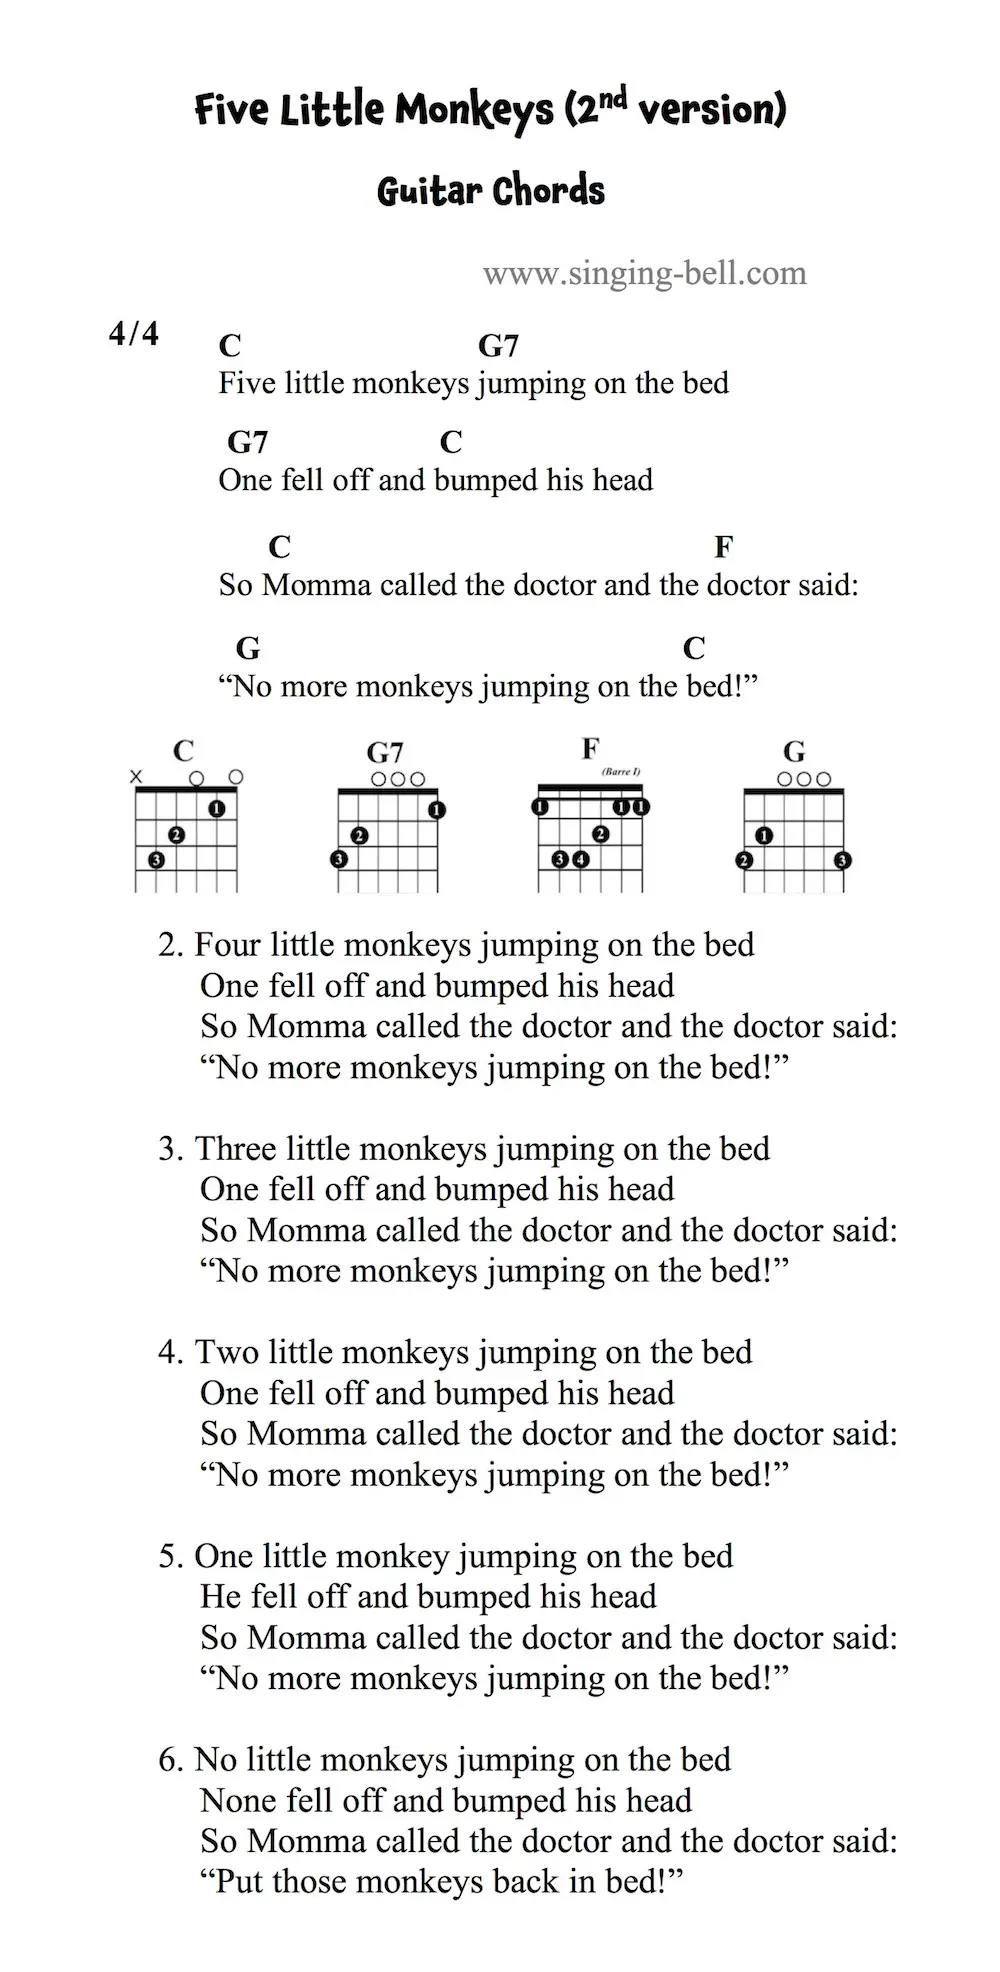 Five Little Monkeys - 2nd version - Guitar Chords and Tabs.